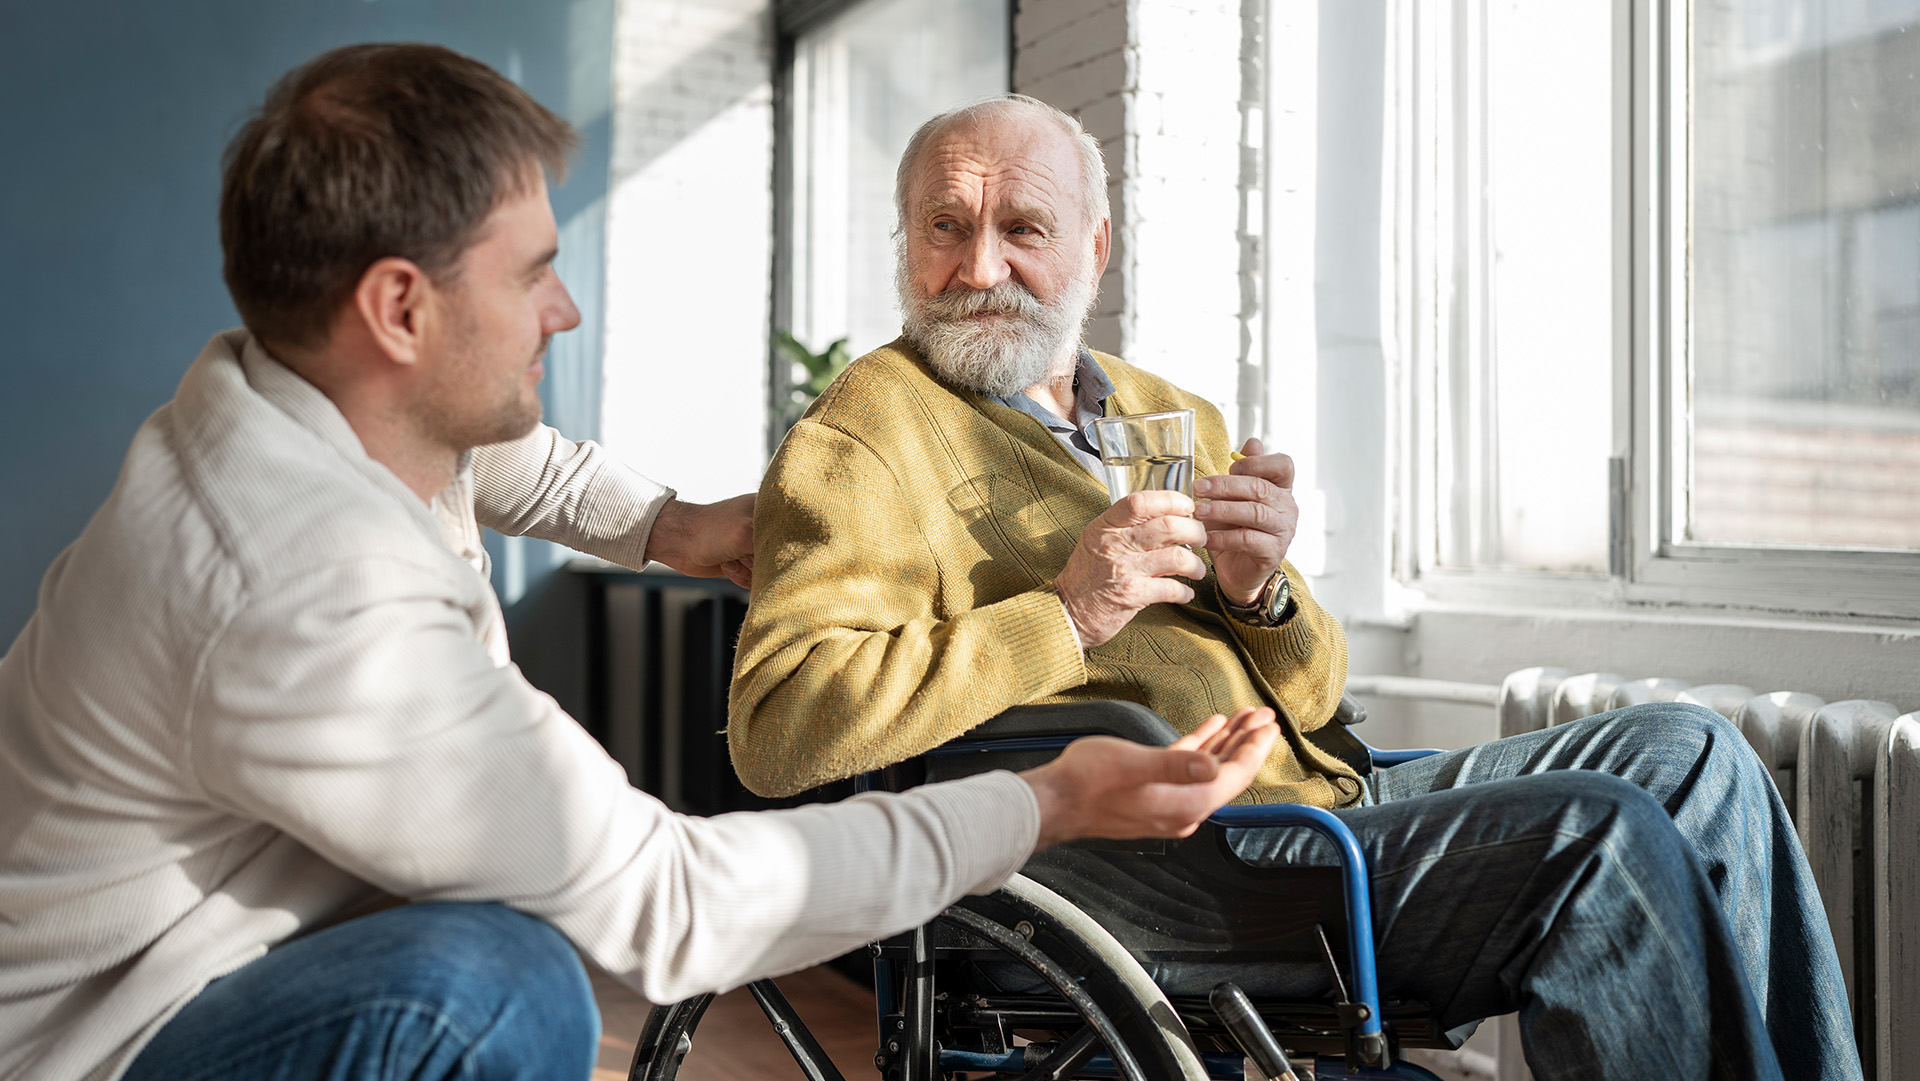 Old man sitting in a wheel chair and young man sitting next to him.